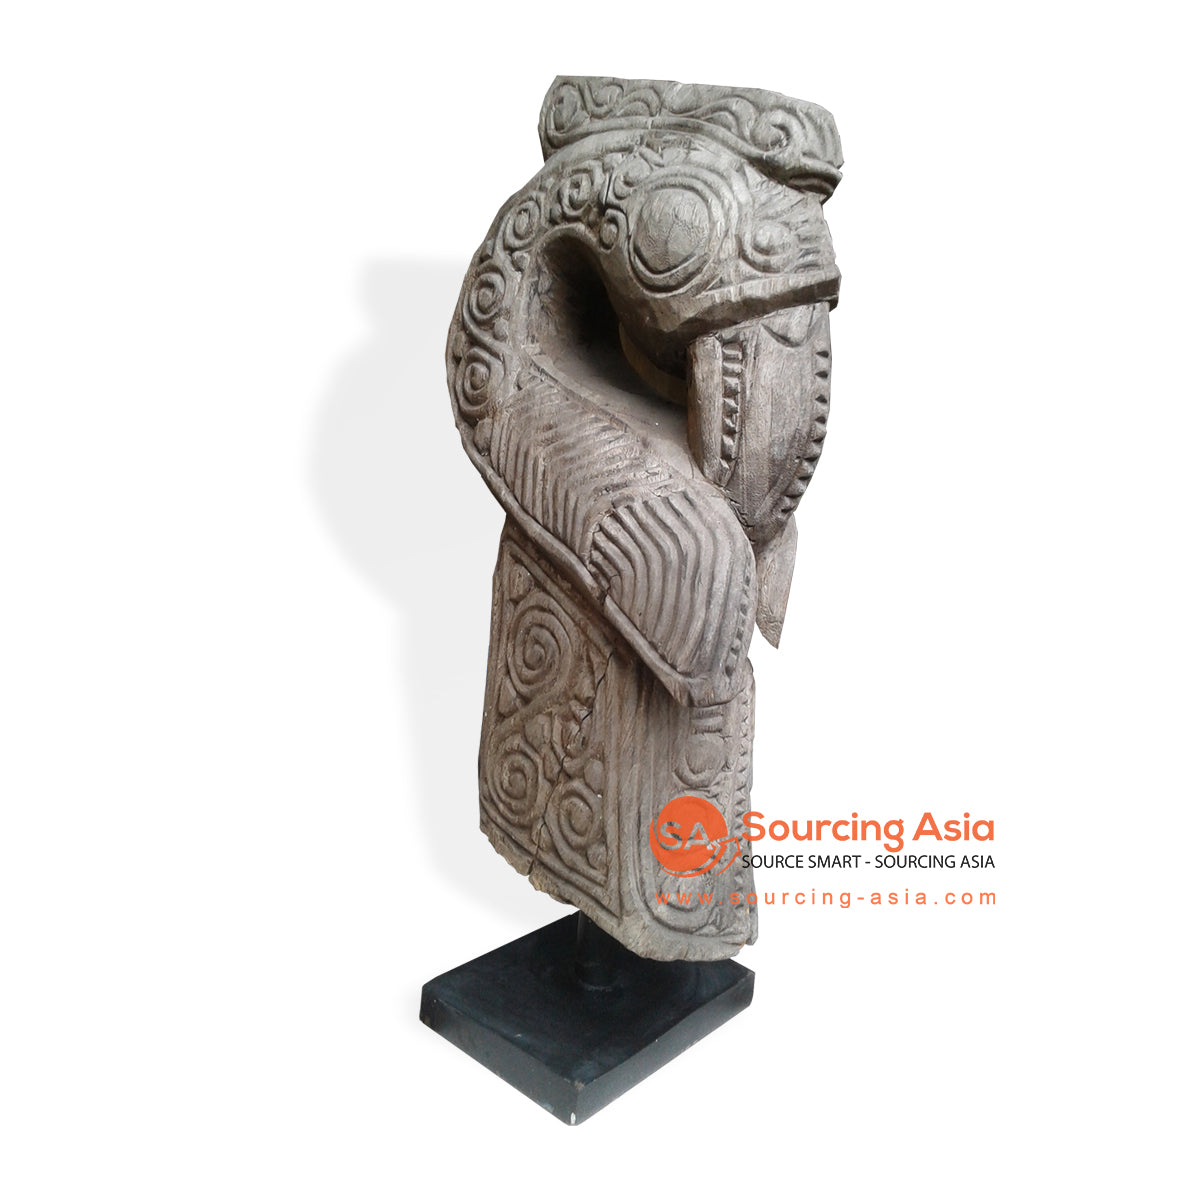 VICT028 DARK BROWN WOODEN TRIBAL CARVED STATUE ON STAND DECORATION